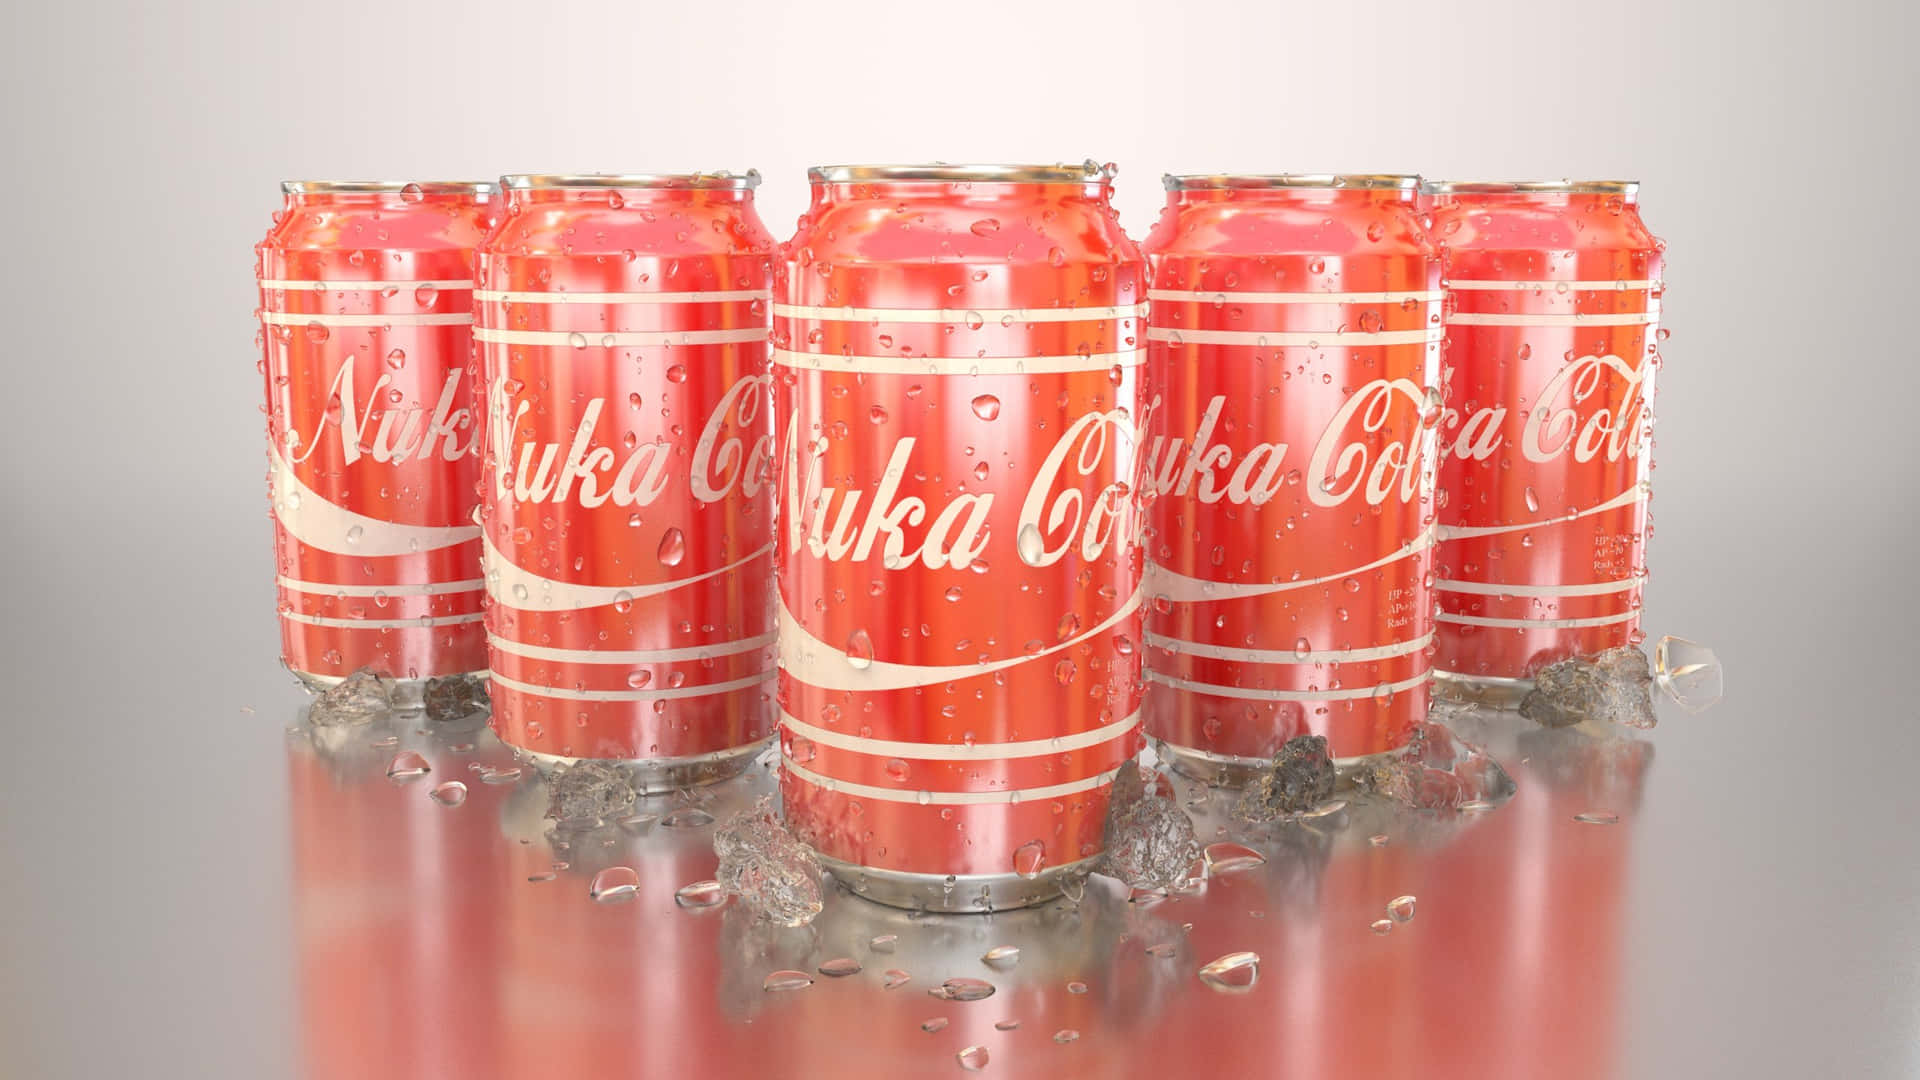 Coca Cola Cans On A Silver Surface Wallpaper